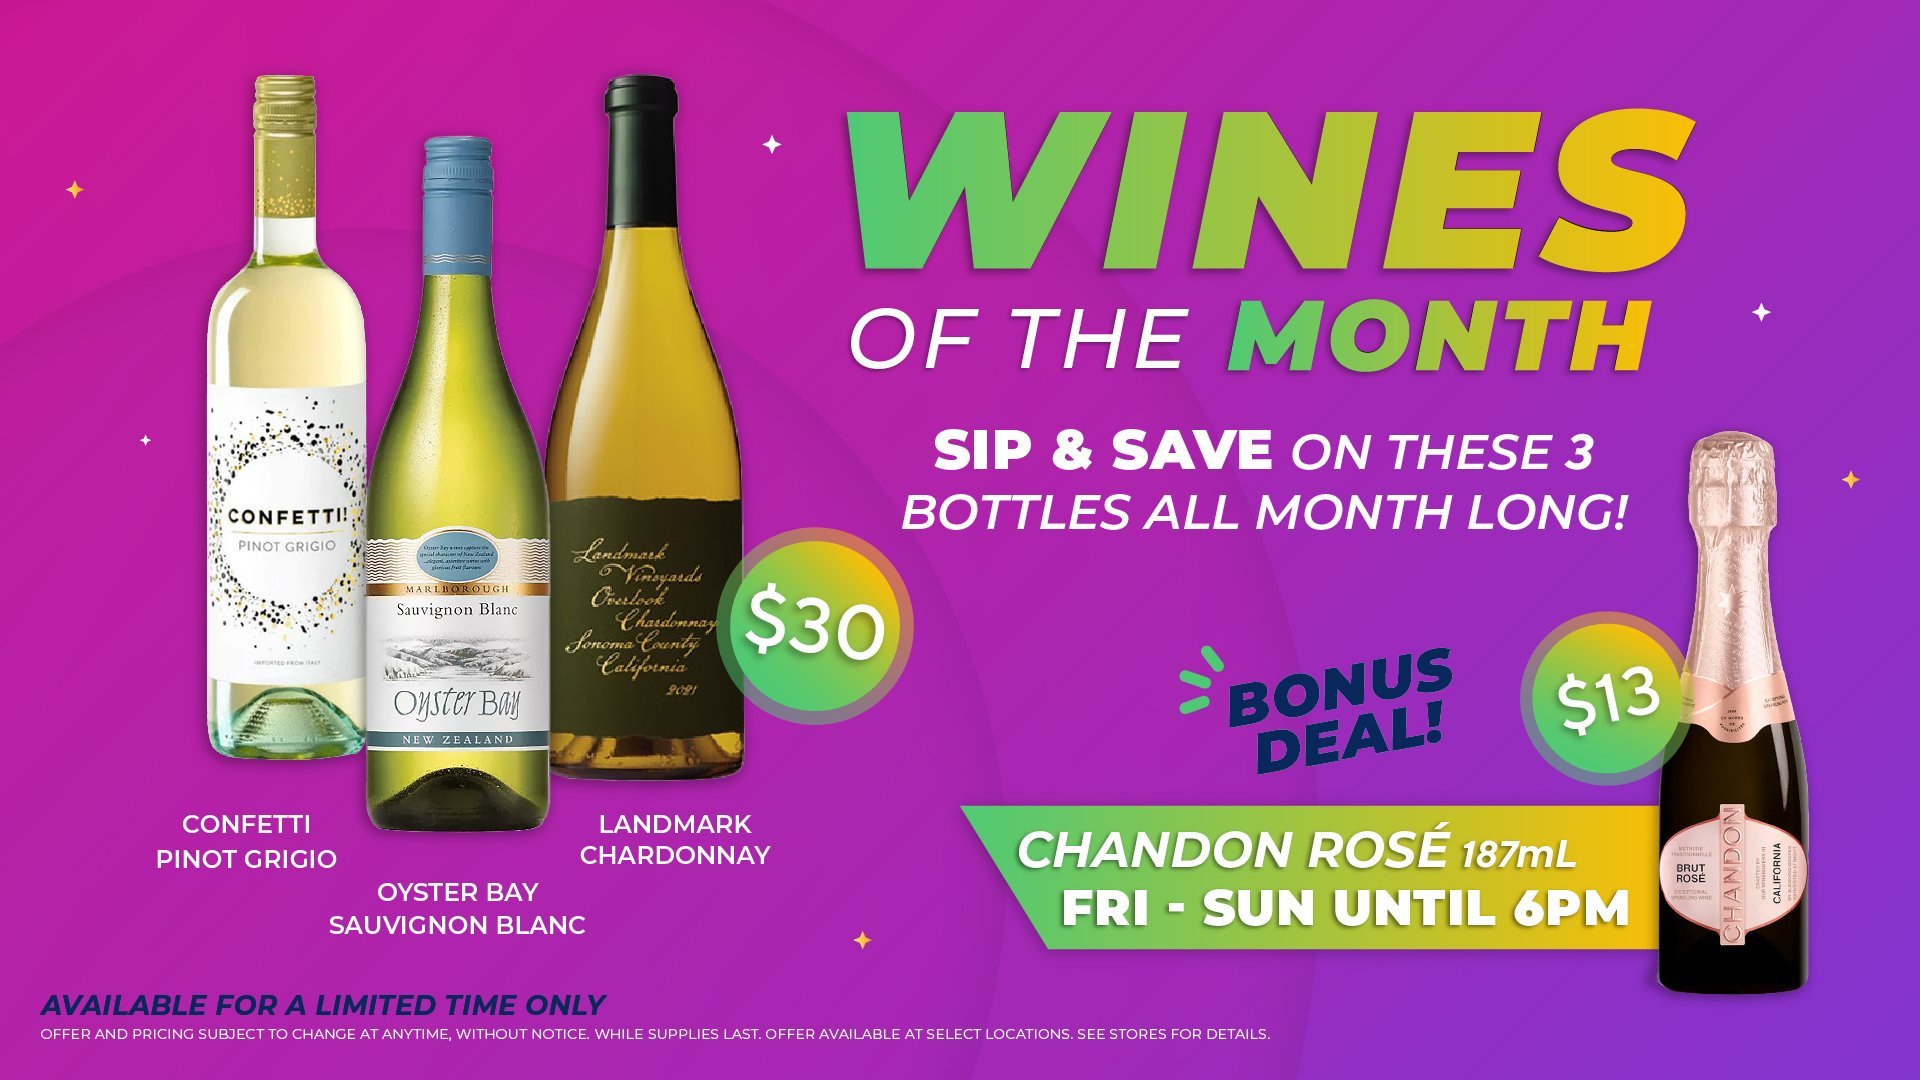 Cinepolis Wine of the Month